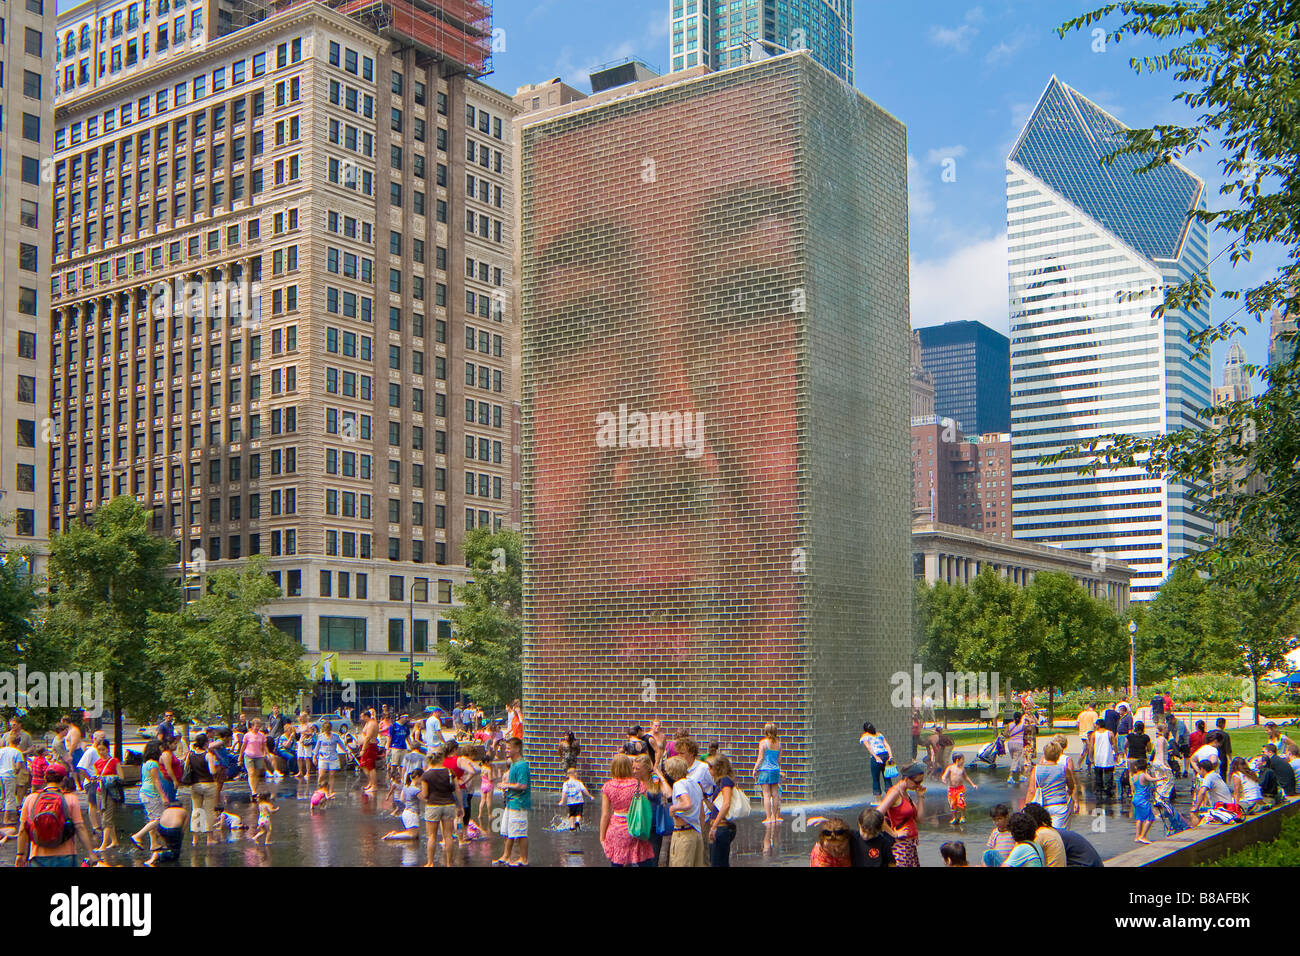 Children and families play in Jaume Plensa's Crown Fountain in Millennium Park Chicago Illinois Stock Photo